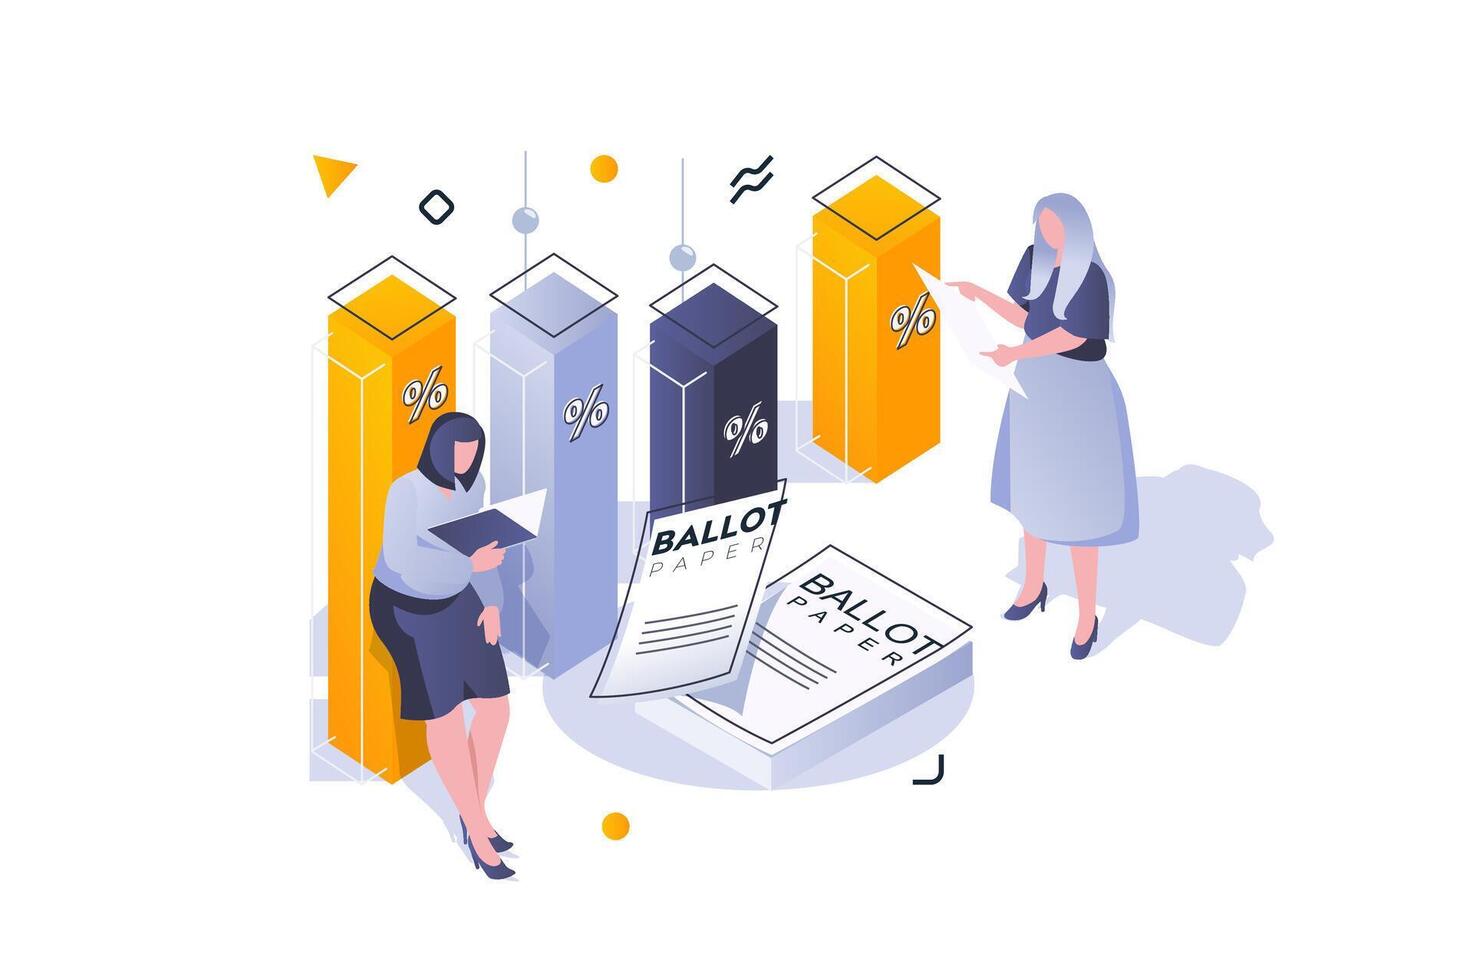 Election and voting concept in 3d isometric design. Women counting exit poll or voting results and show data at bar charts percentage. Vector illustration with isometric people scene for web graphic